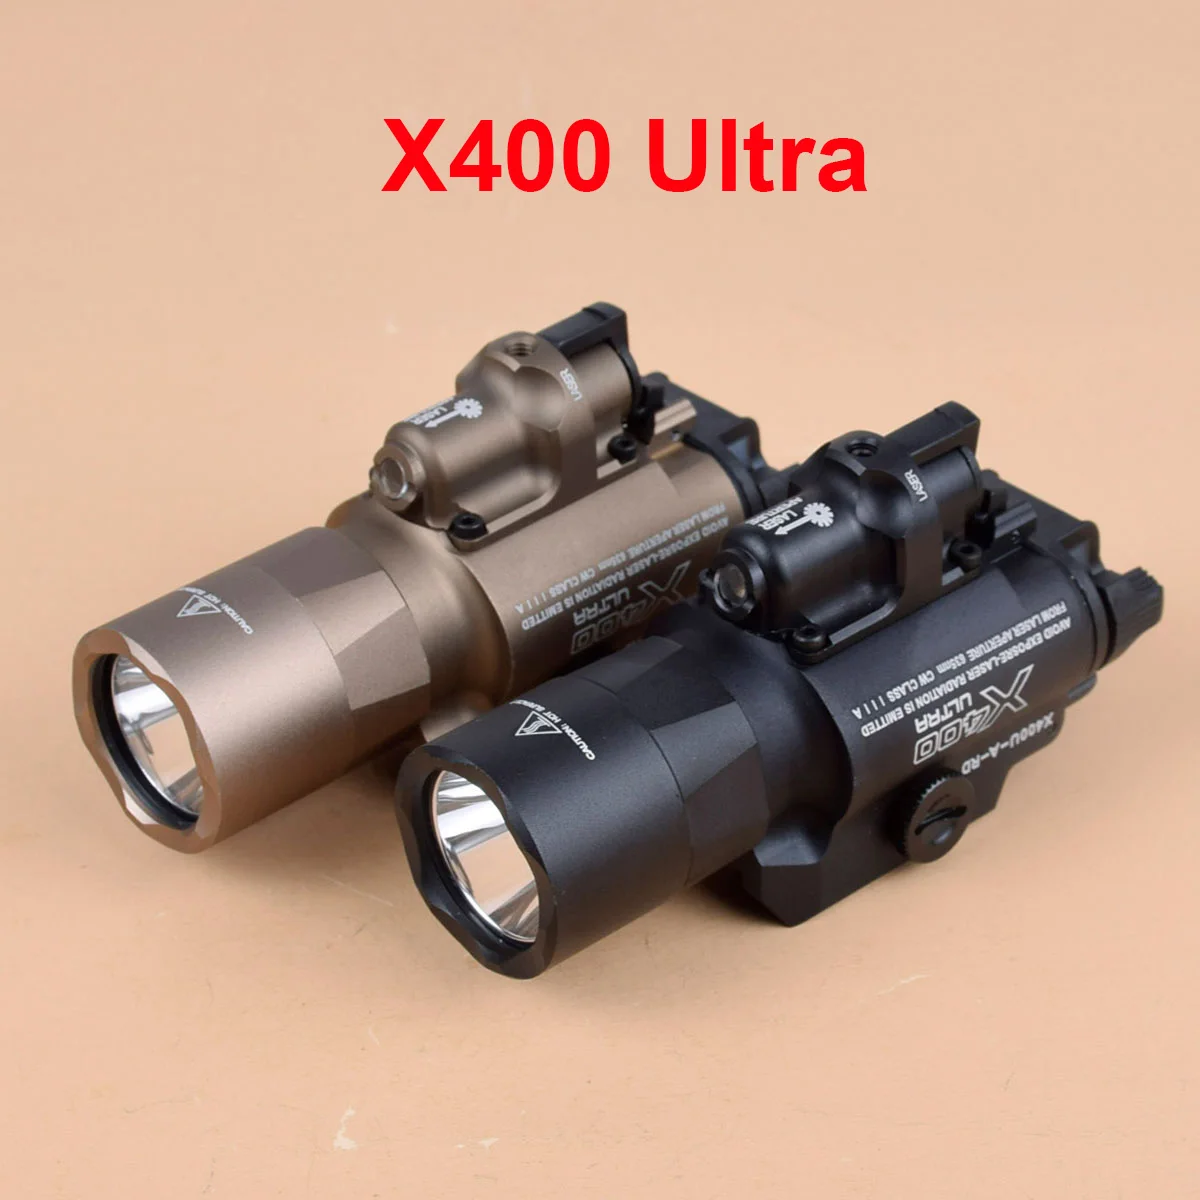 

Tactical SF X400 Ultra Weapon Pistol Gun Light Combo Red Green Laser Sight For Airsoft Glock 17 18 22 With 20mm Rail